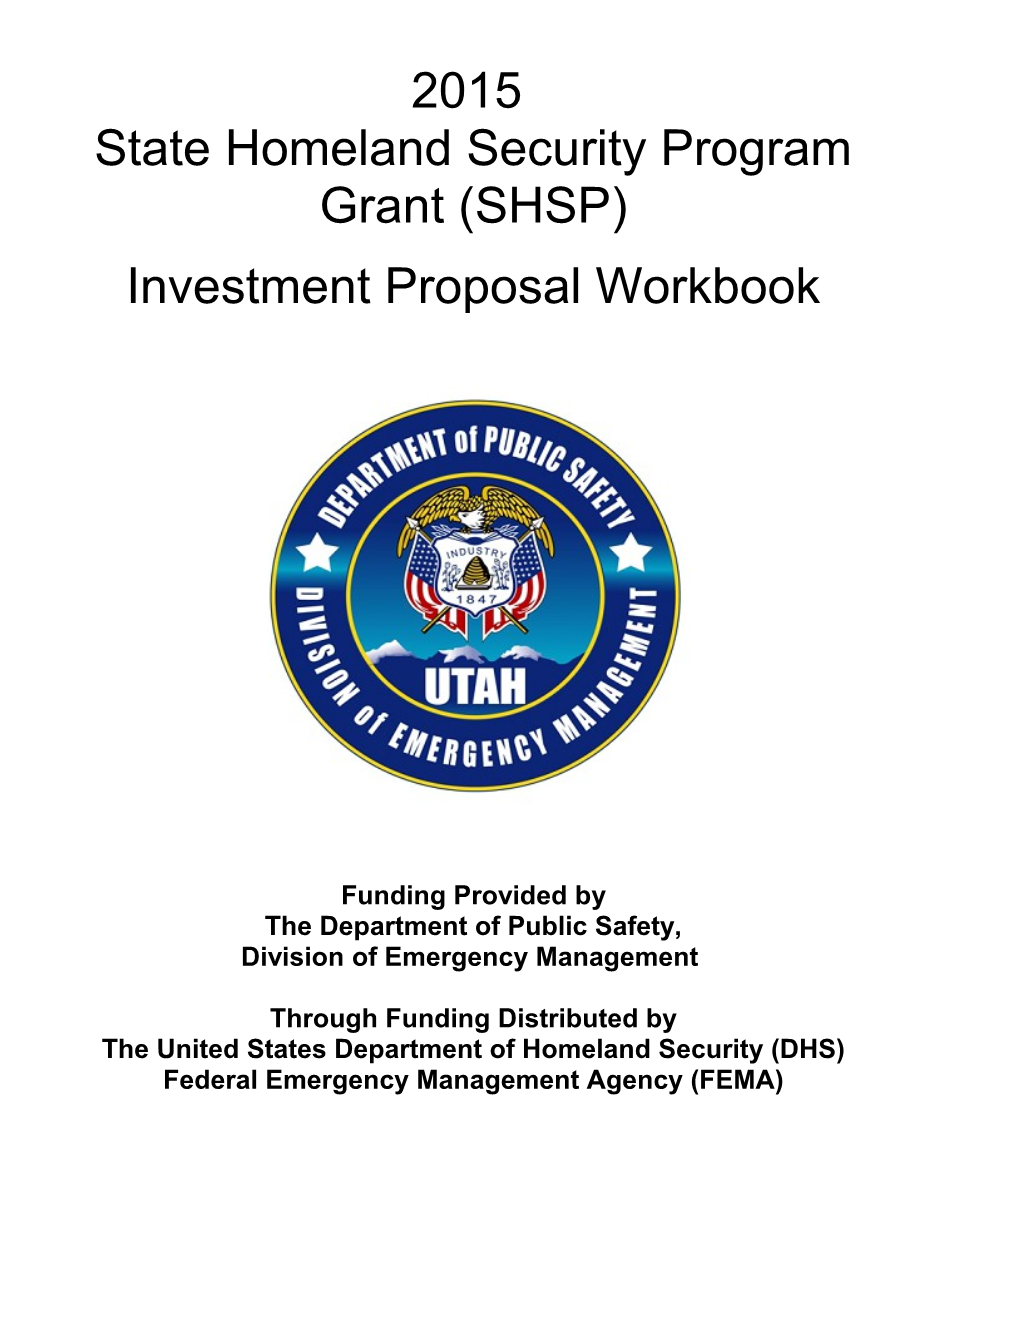 2015 Regional Homeland Security Project Investment Proposal Workbook